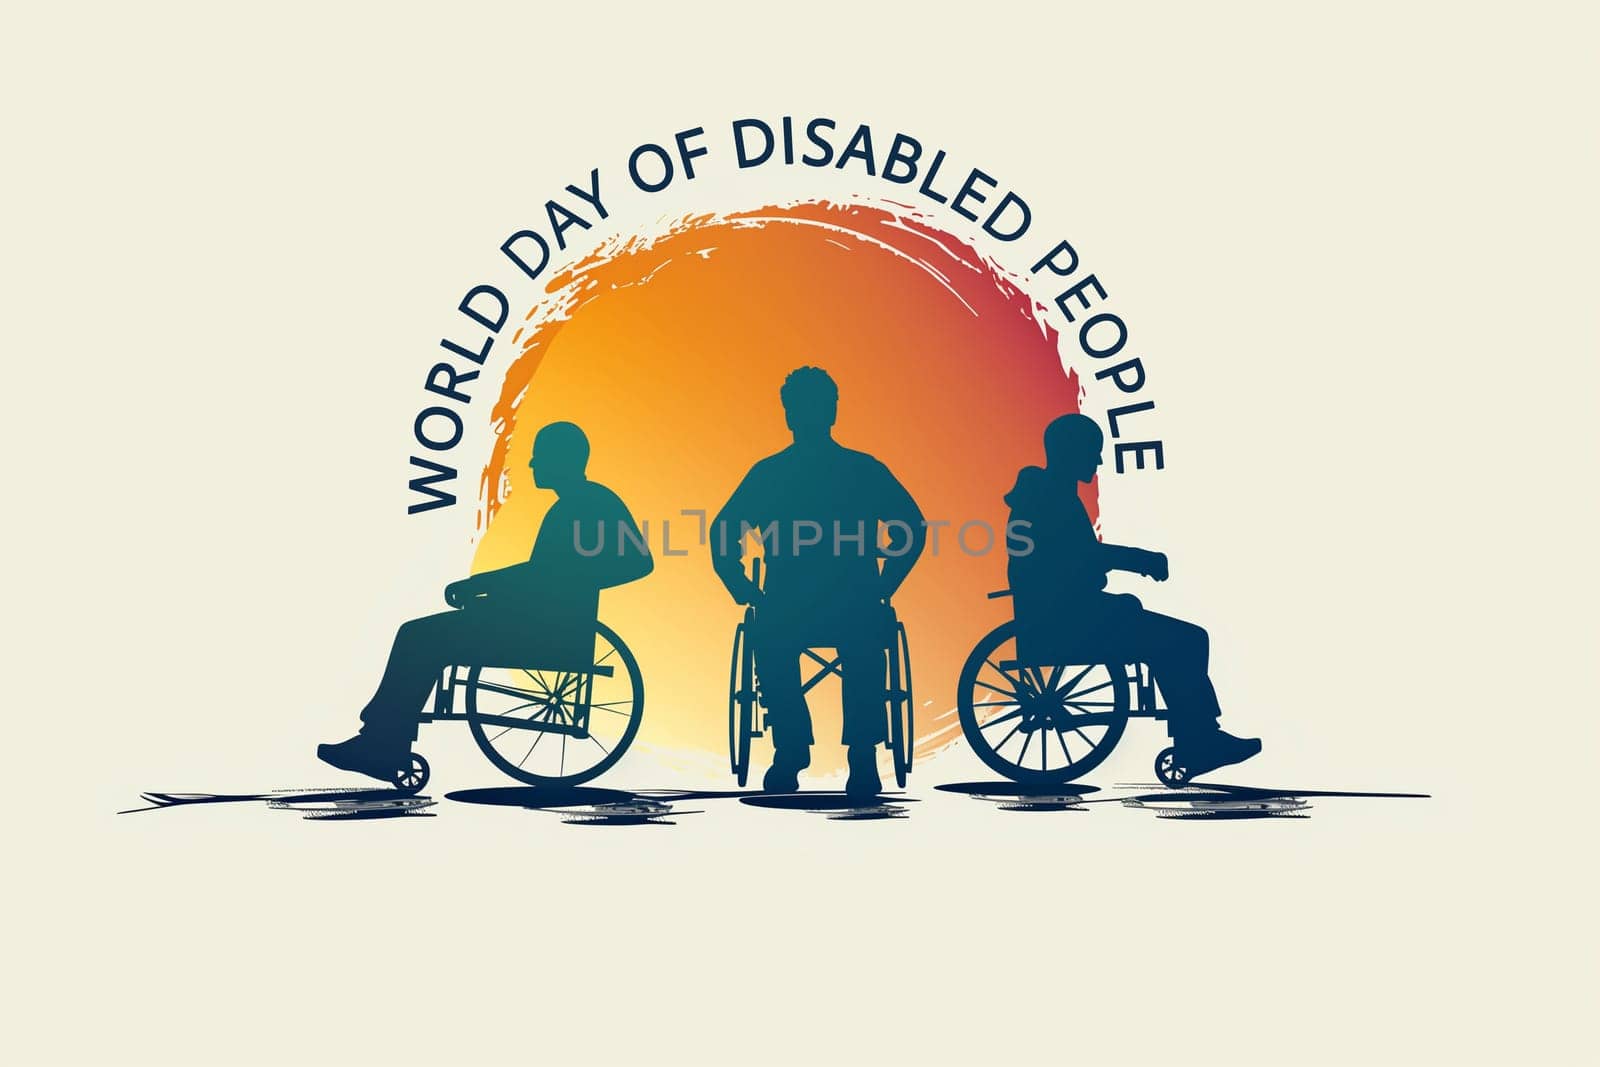 Three silhouettes of individuals in wheelchairs depicted against a warm backdrop, symbolizing solidarity and awareness on World Day of Disabled People.